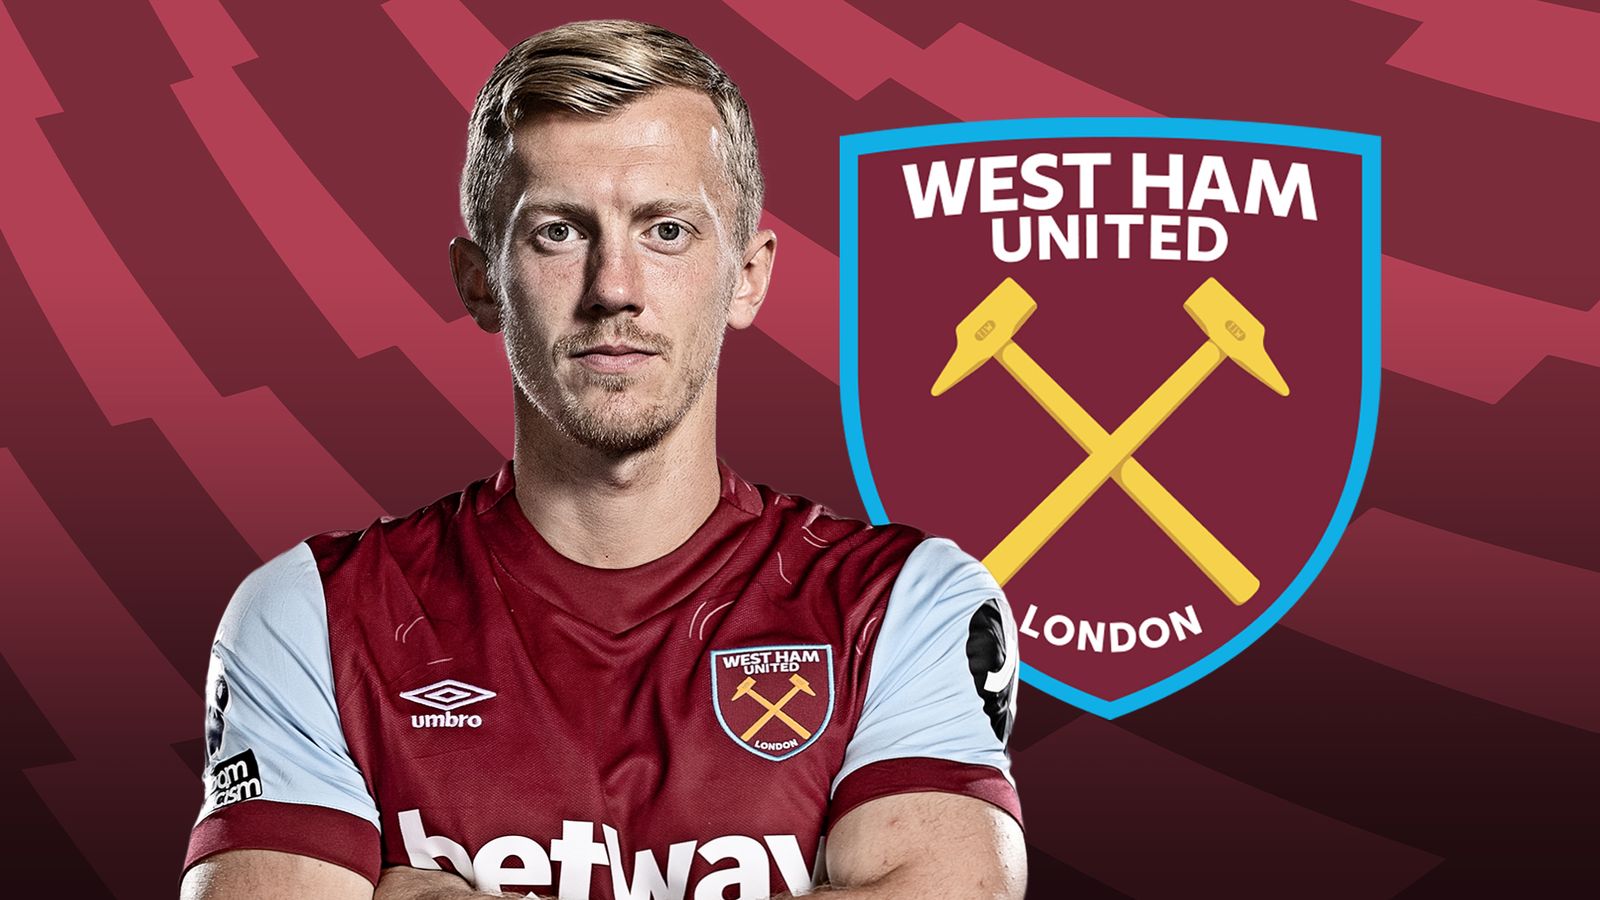 James Ward-Prowse interview: West Ham midfielder discusses David Beckham's influence and his new surroundings in east London | Football News